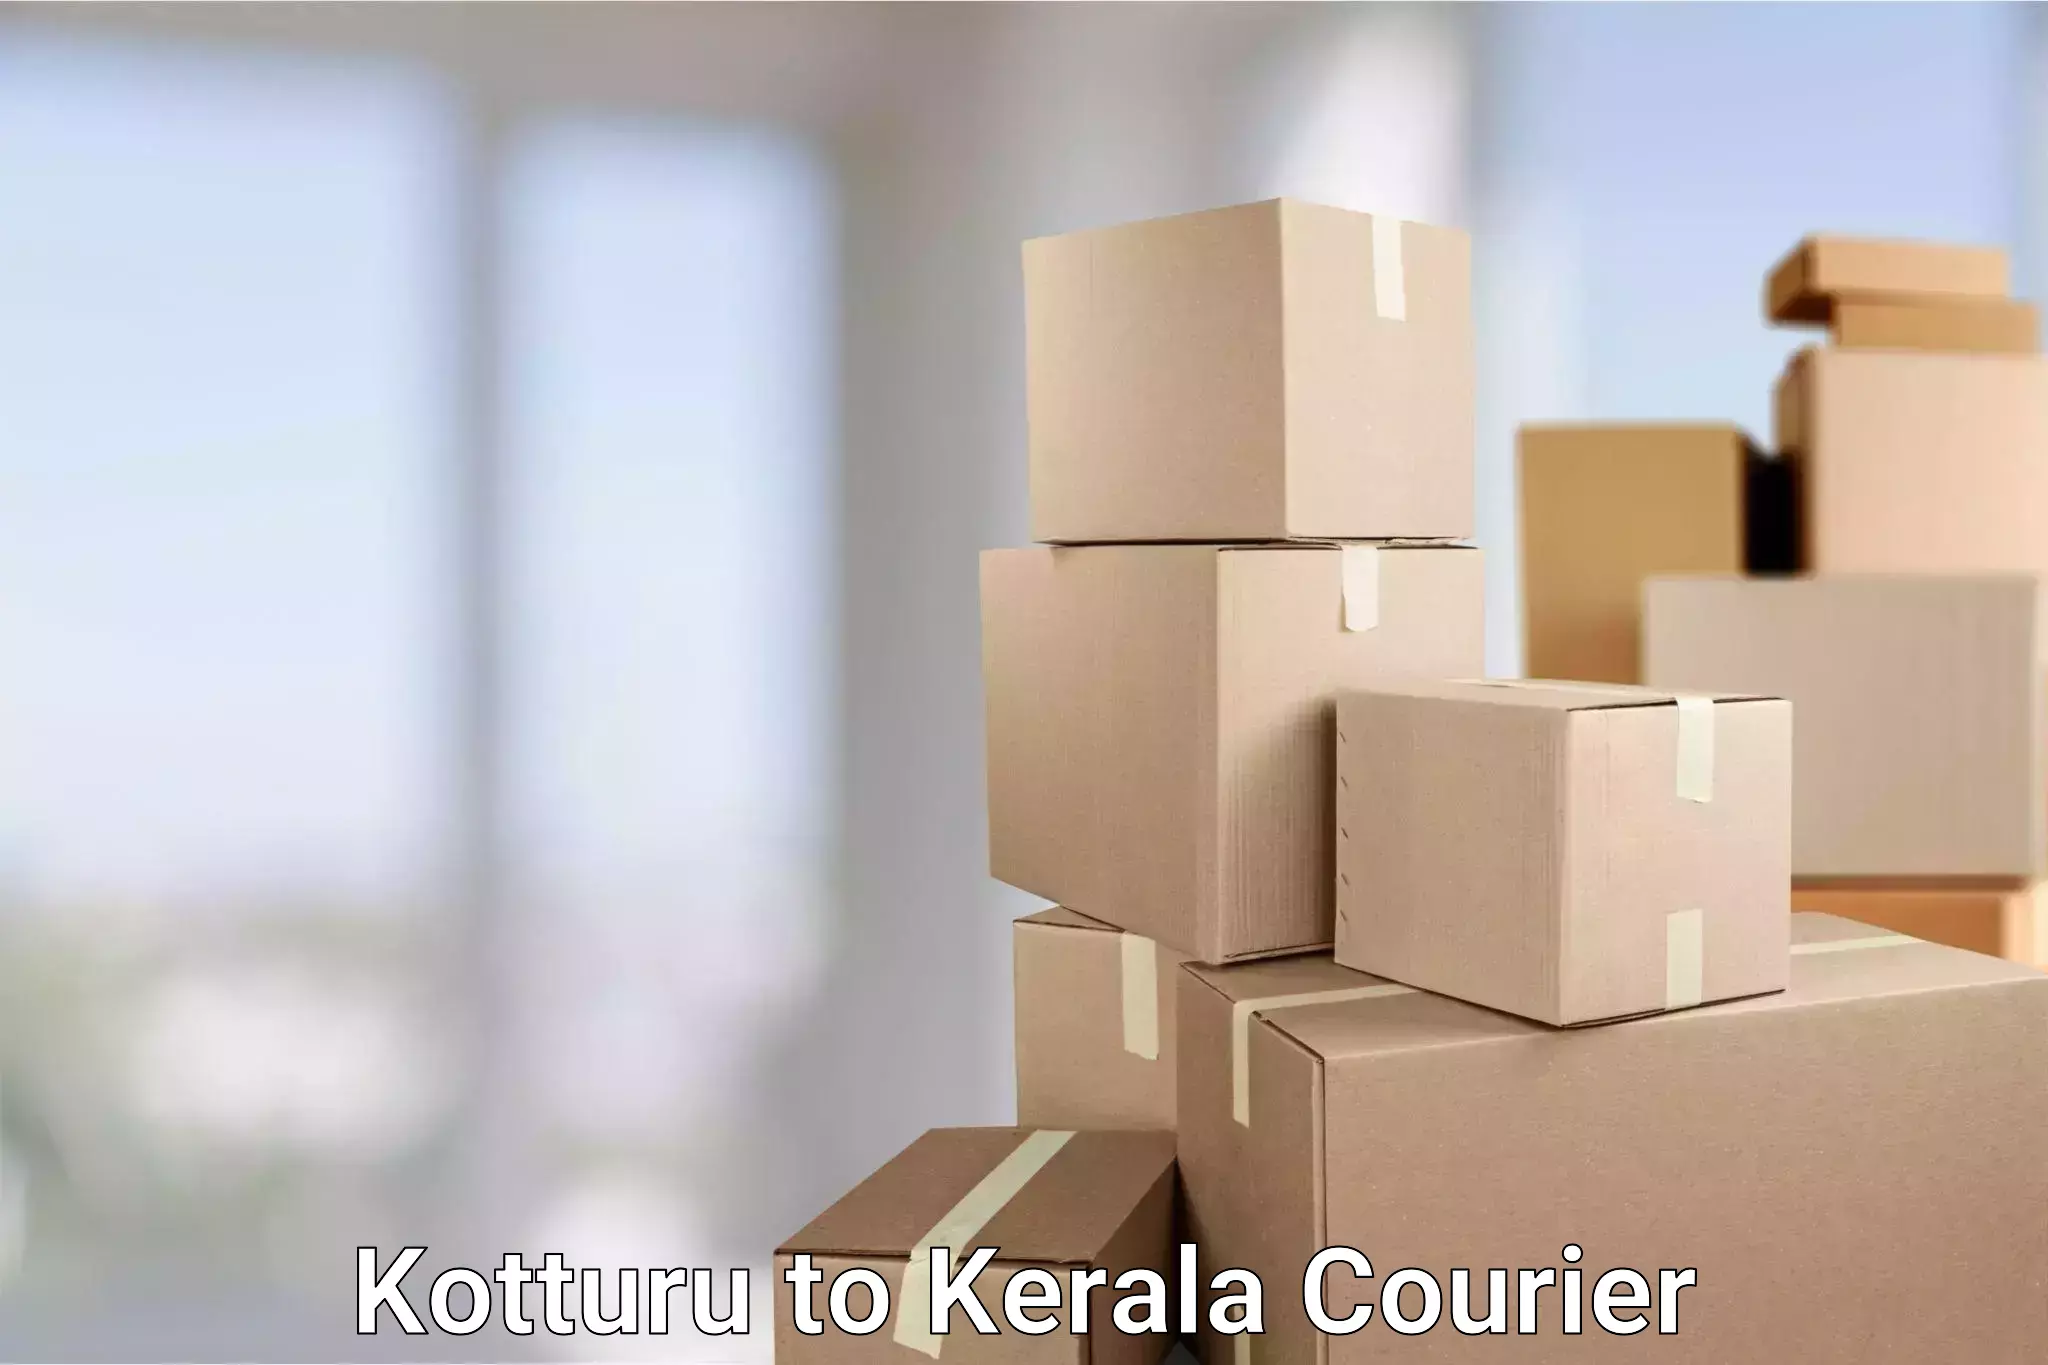 Fast parcel dispatch Kotturu to Cochin University of Science and Technology